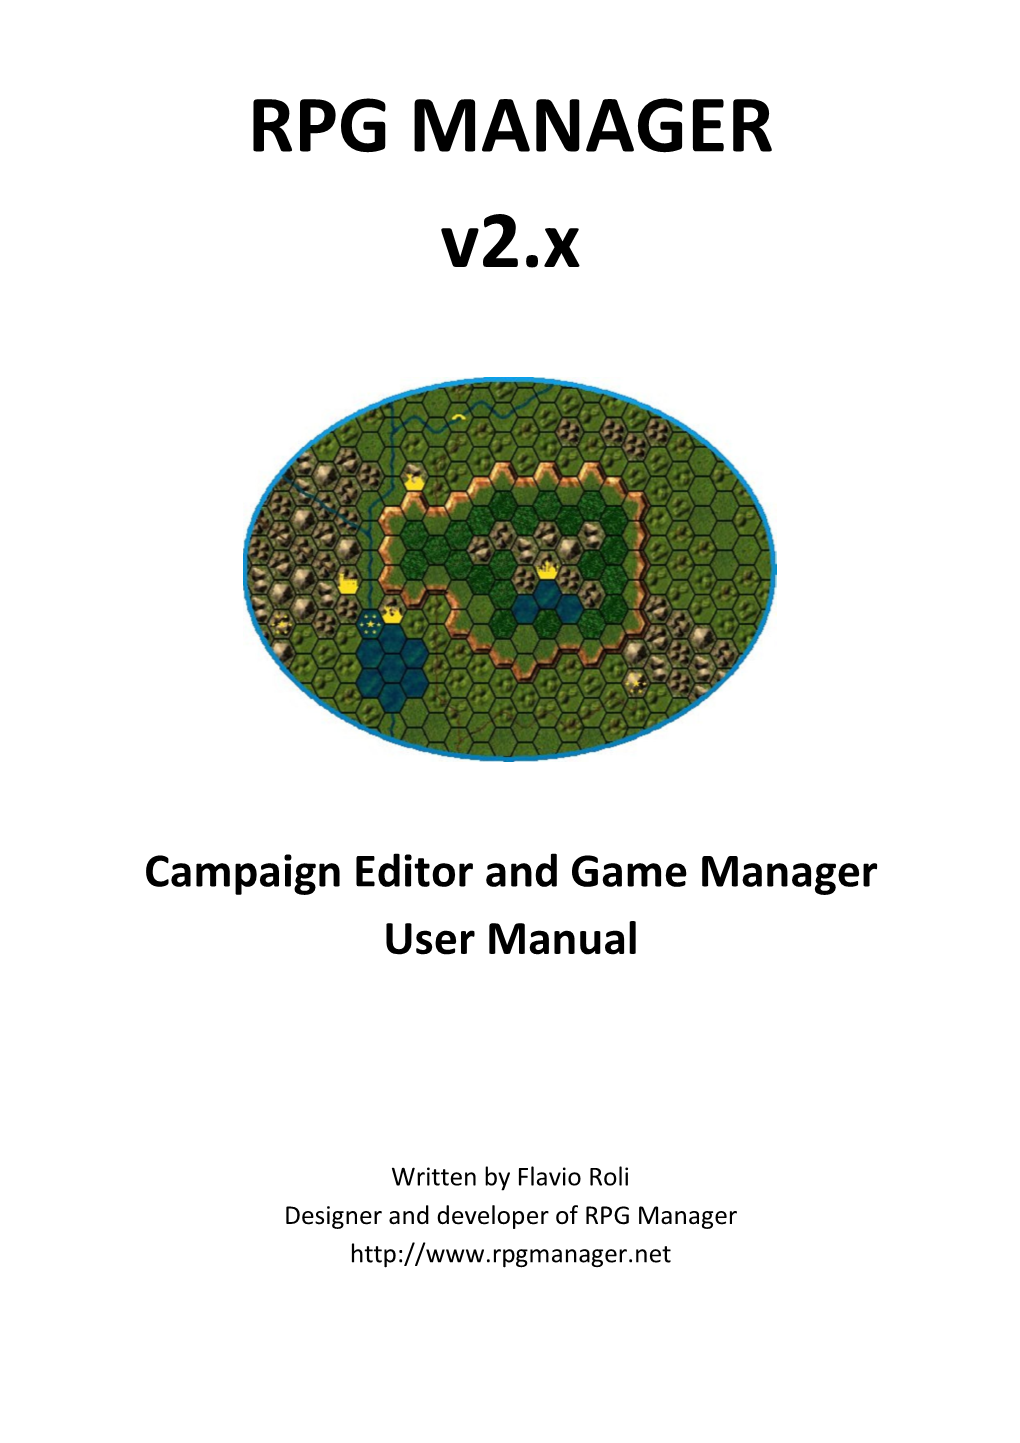 RPG MANAGER V2.X – an INTRODUCTION